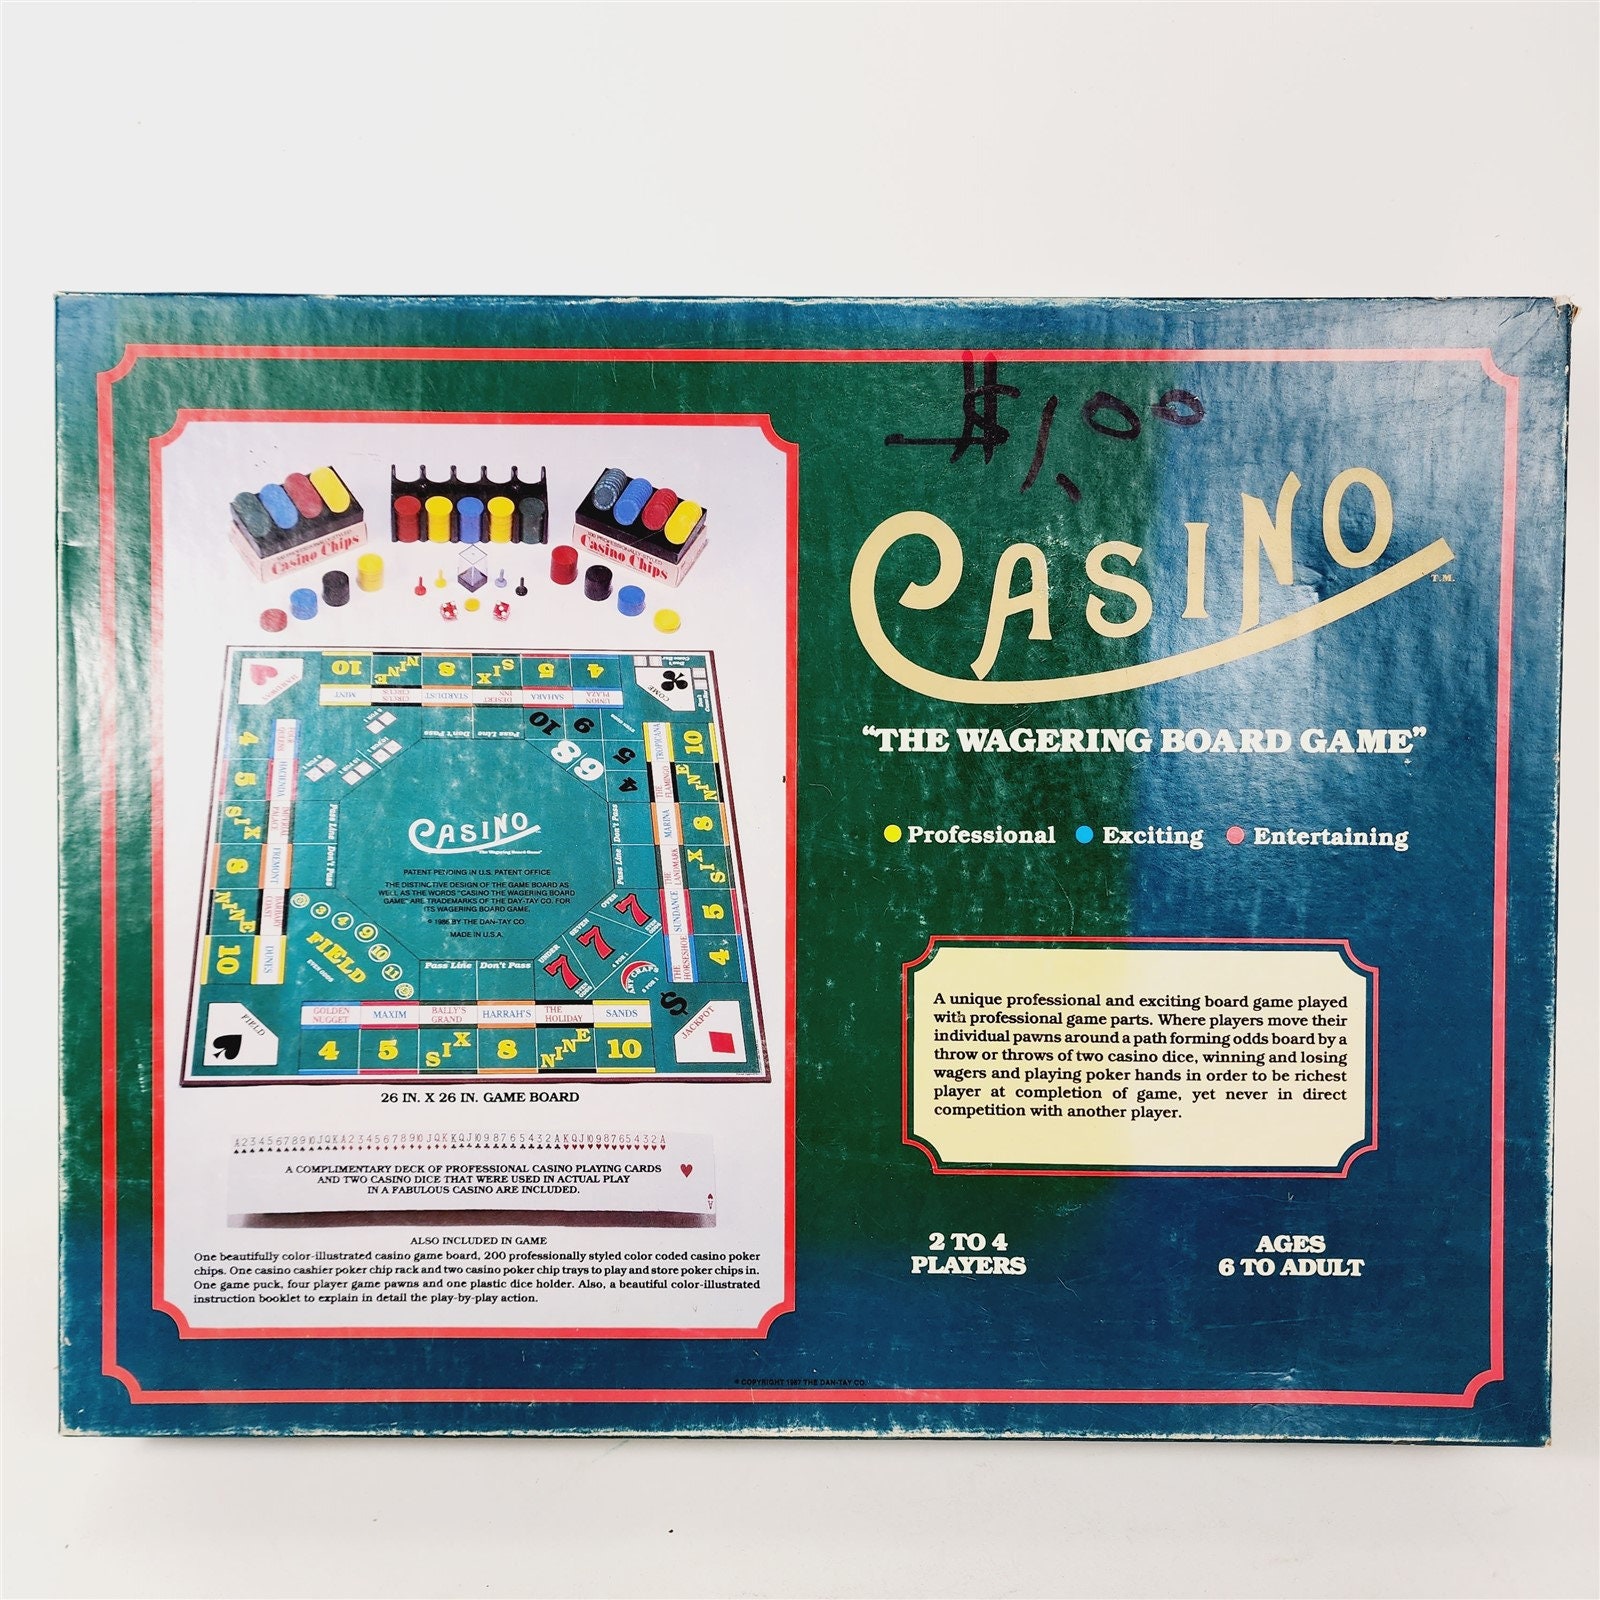 Can You Really Find Crafting Your Casino Adventure: Tips for Crafting the Ultimate Live Gaming Experience in India on the Web?